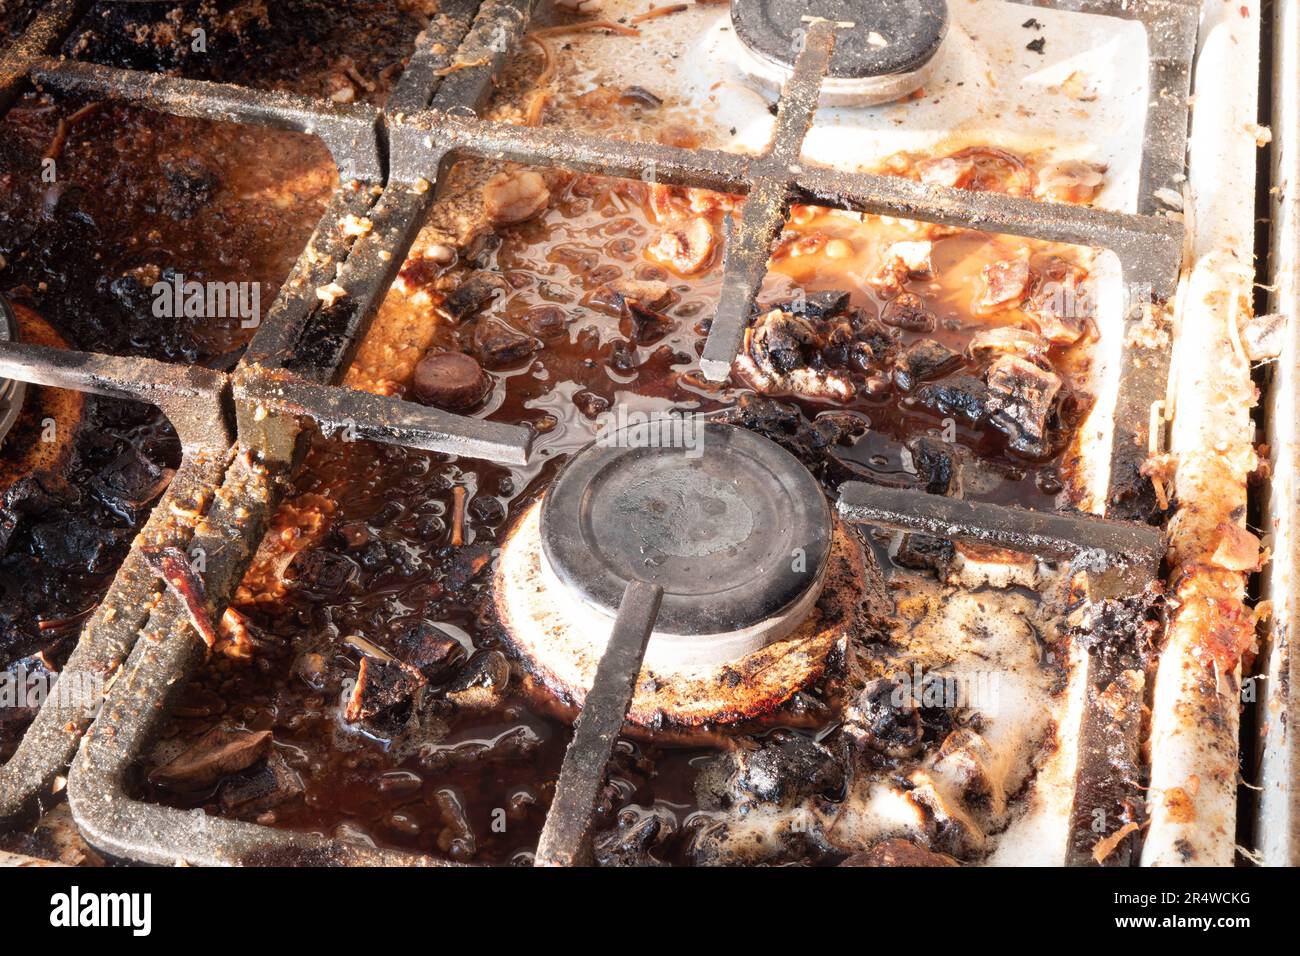 https://c8.alamy.com/comp/2R4WCKG/dirty-gas-stove-surface-medium-gas-burner-and-cast-iron-grate-of-a-gas-oven-surrounded-by-old-leftovers-of-food-and-drinks-top-area-surface-and-burn-2R4WCKG.jpg